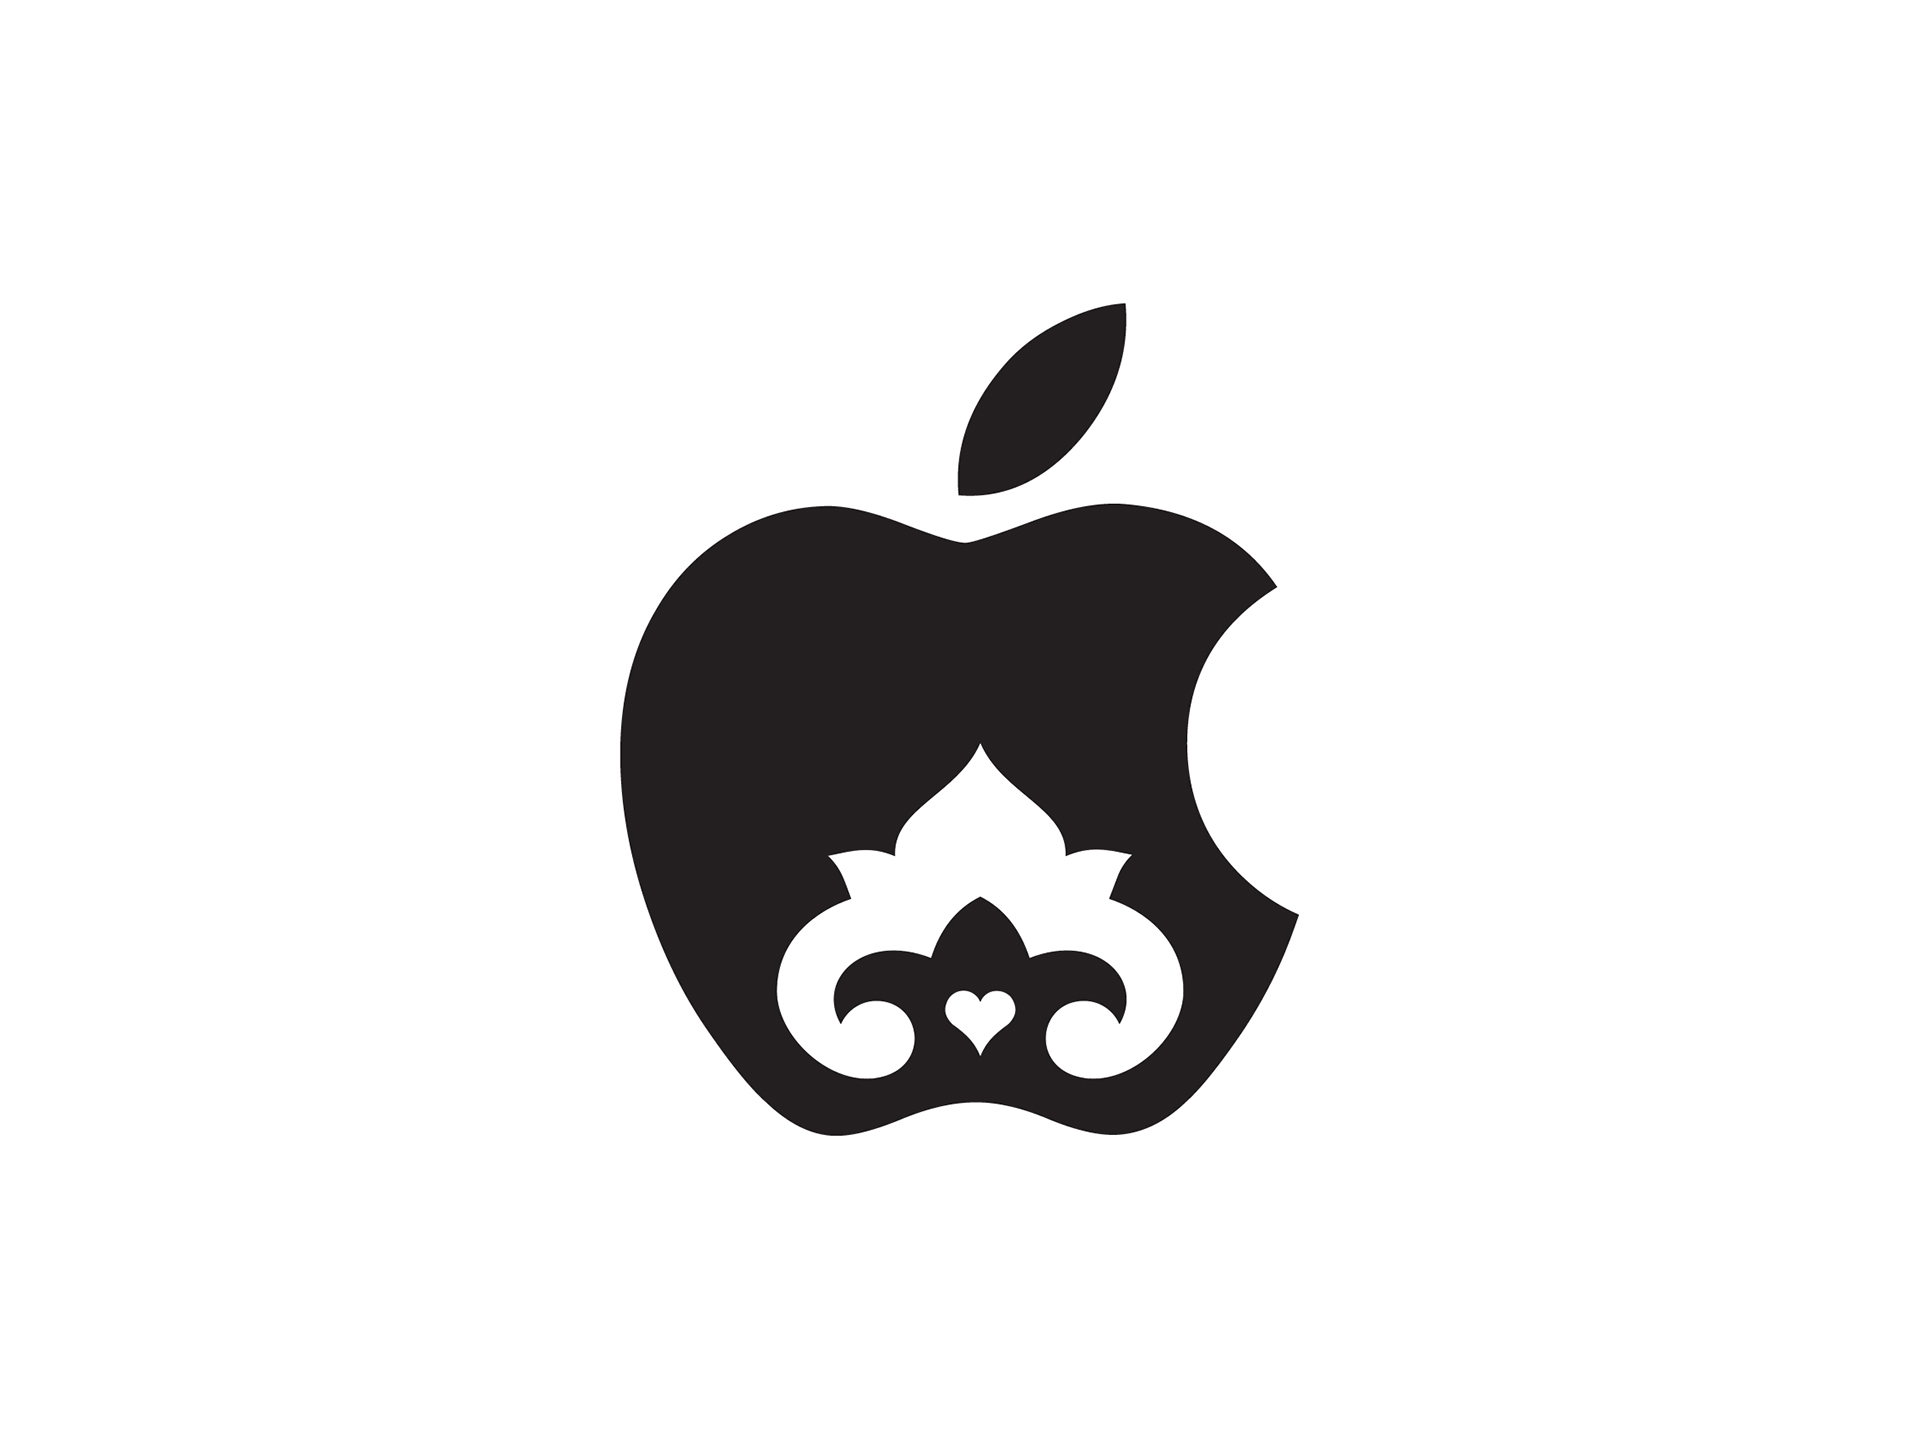 Famous Logos Re-designed in tatar style 02